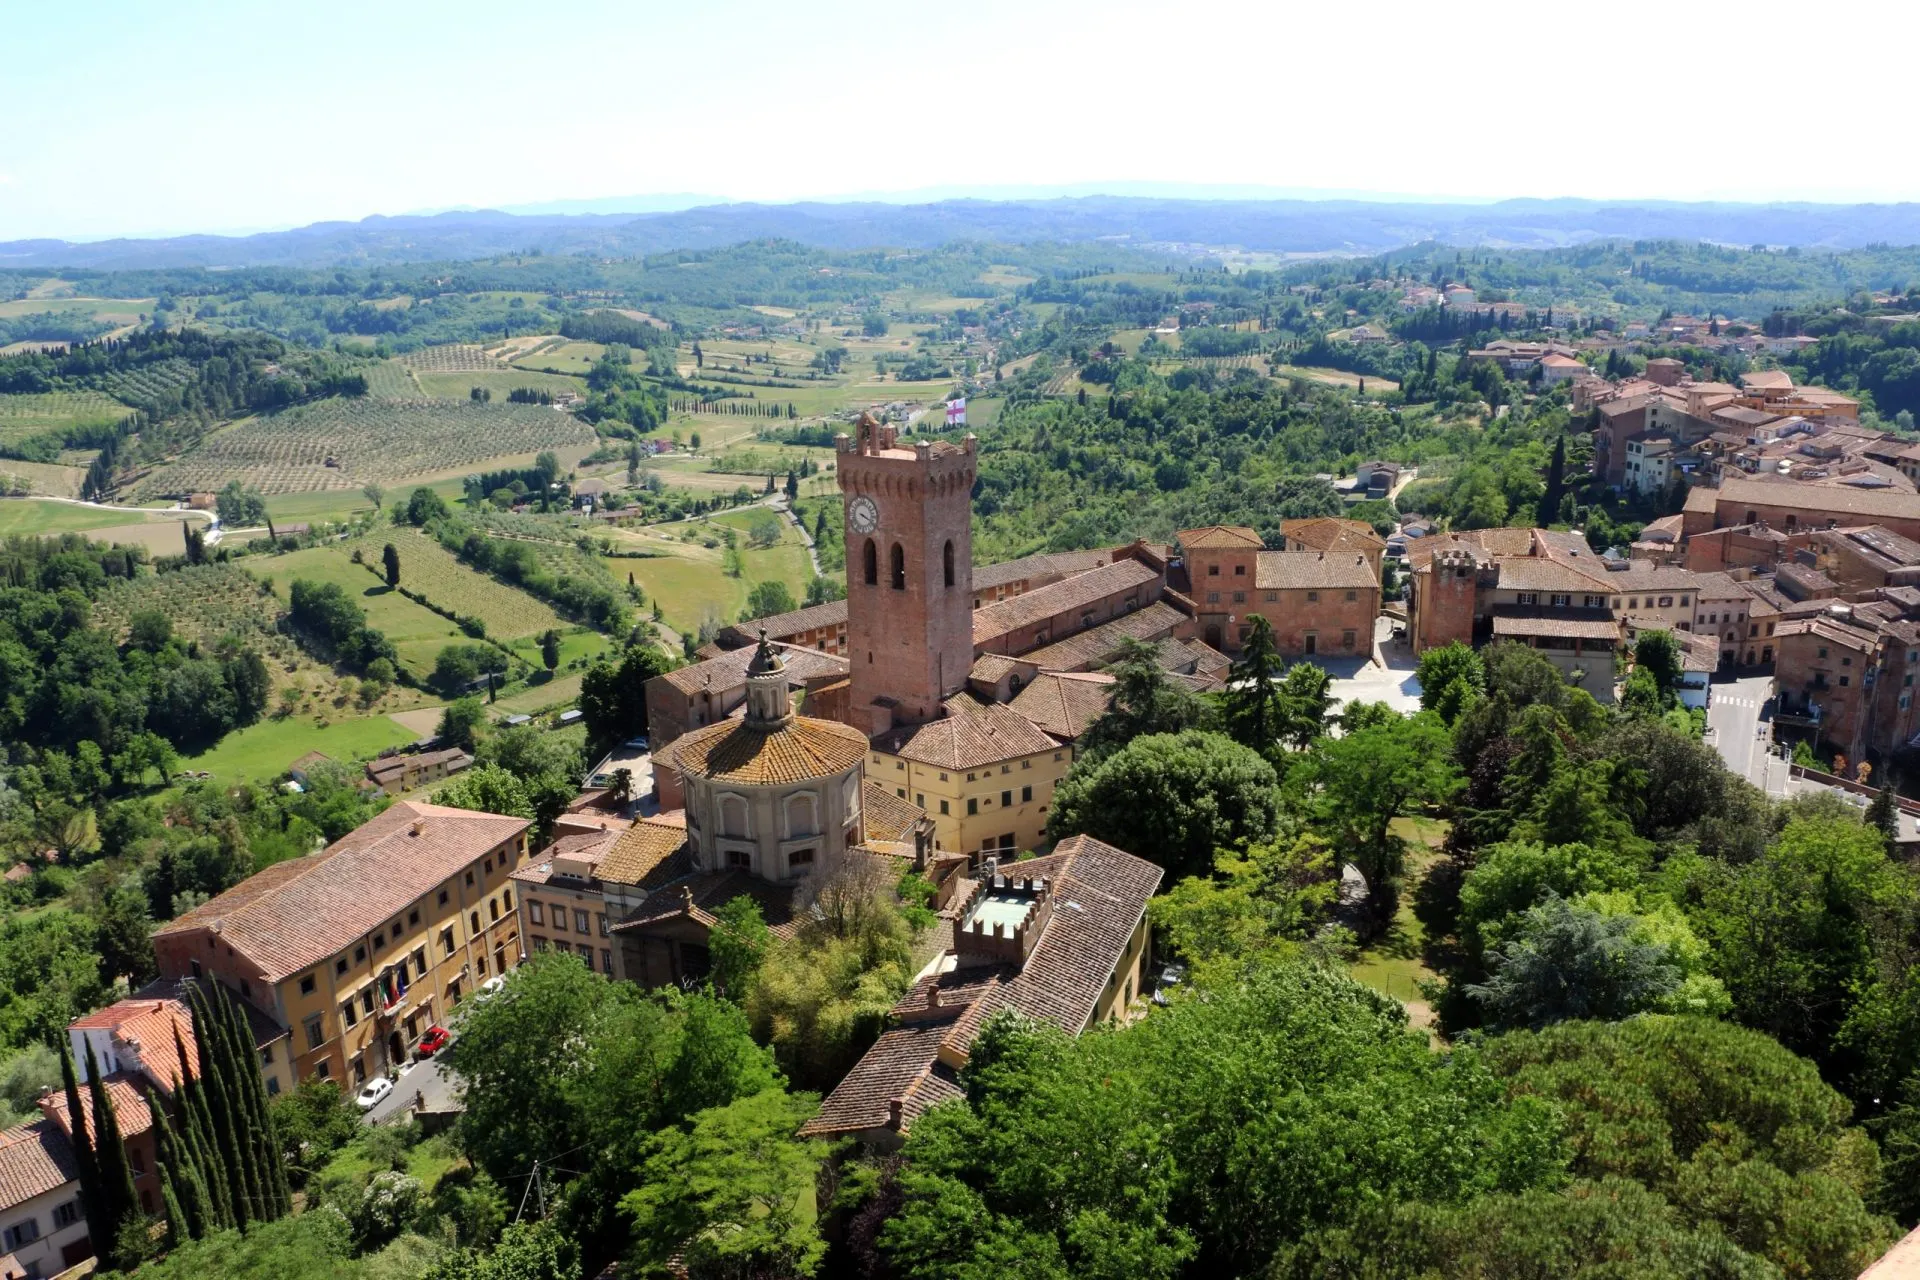 Landscape and city view from up of the Cathedral of Santa Maria Assunta e San Genesio in San Miniato, Tuscany, Italy.